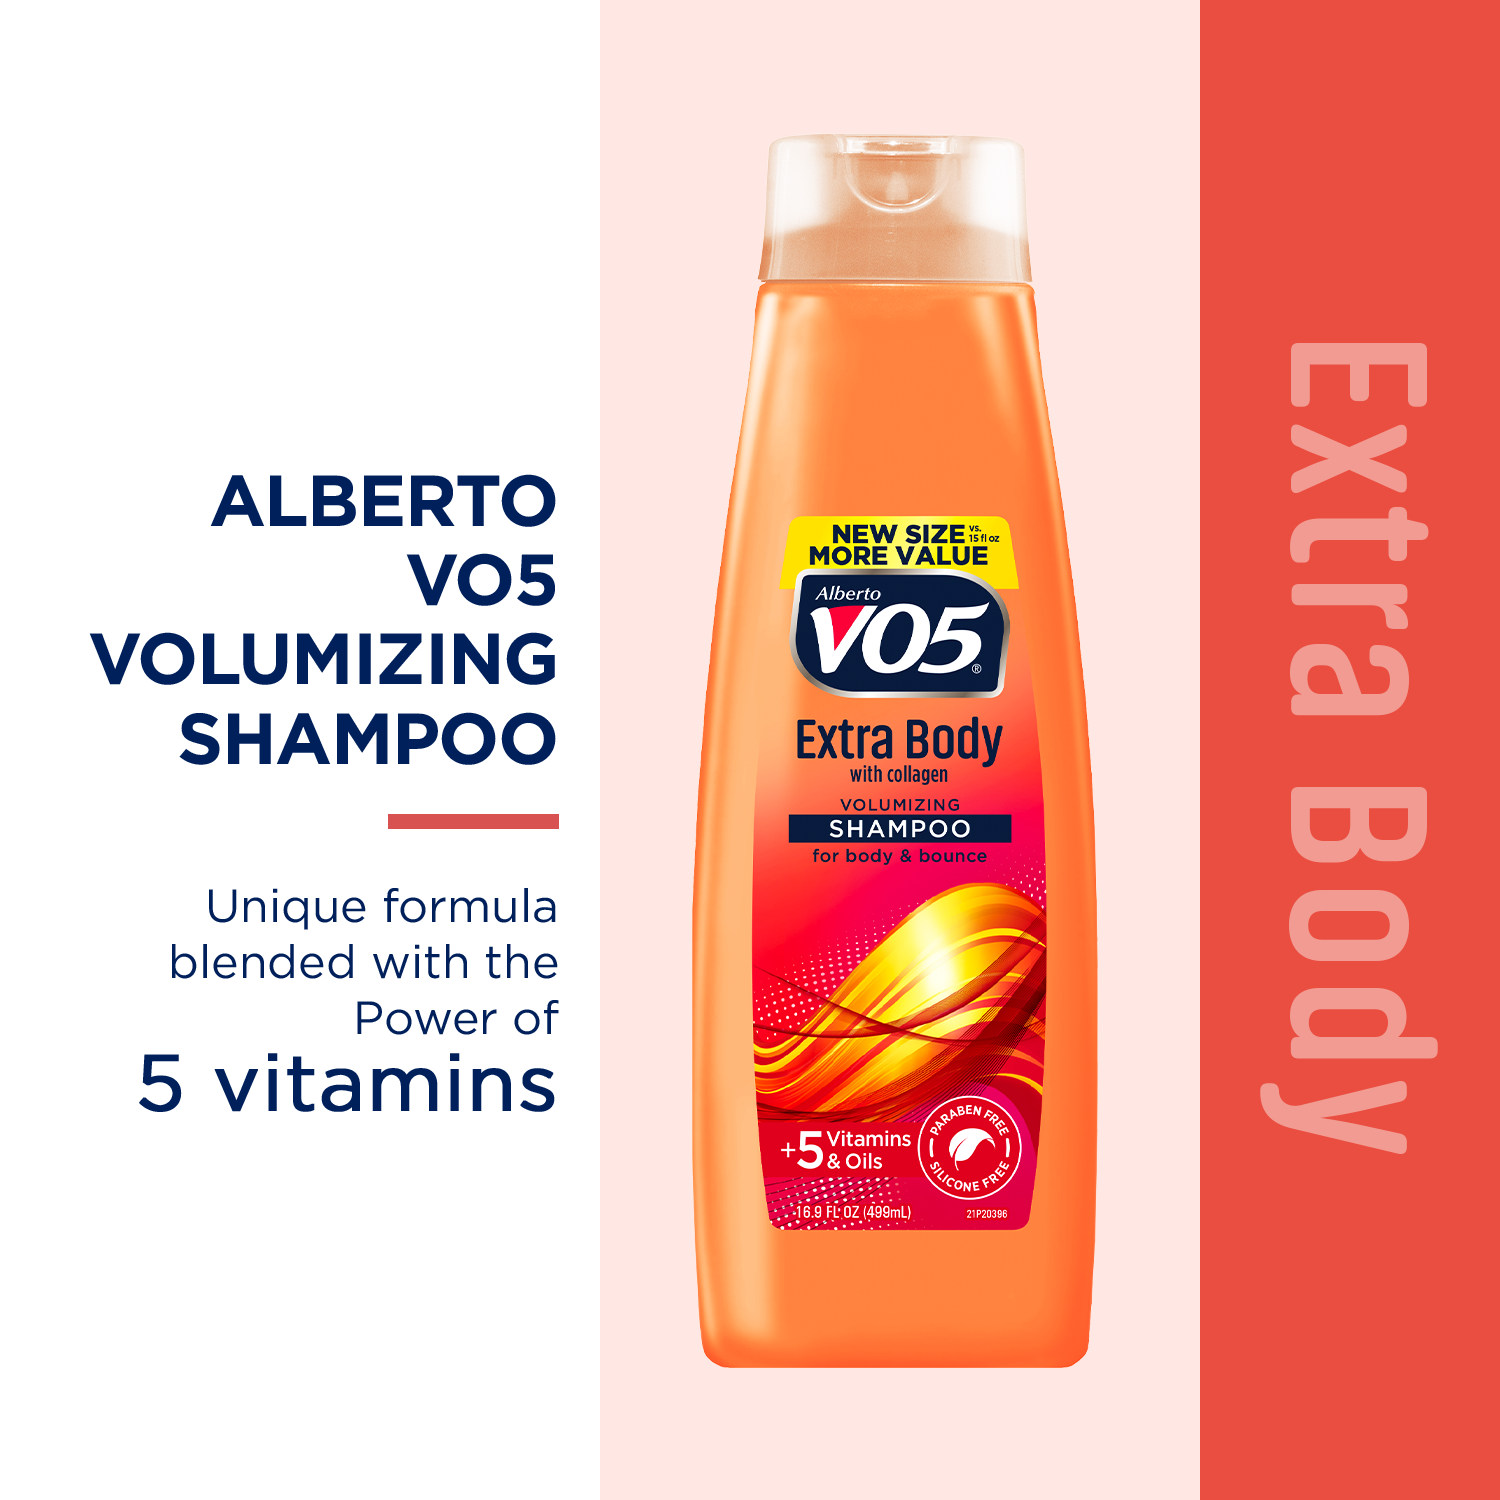 Alberto VO5 Extra Body Volumizing Shampoo with Collagen for All Hair Types, 16.9 oz - image 3 of 6